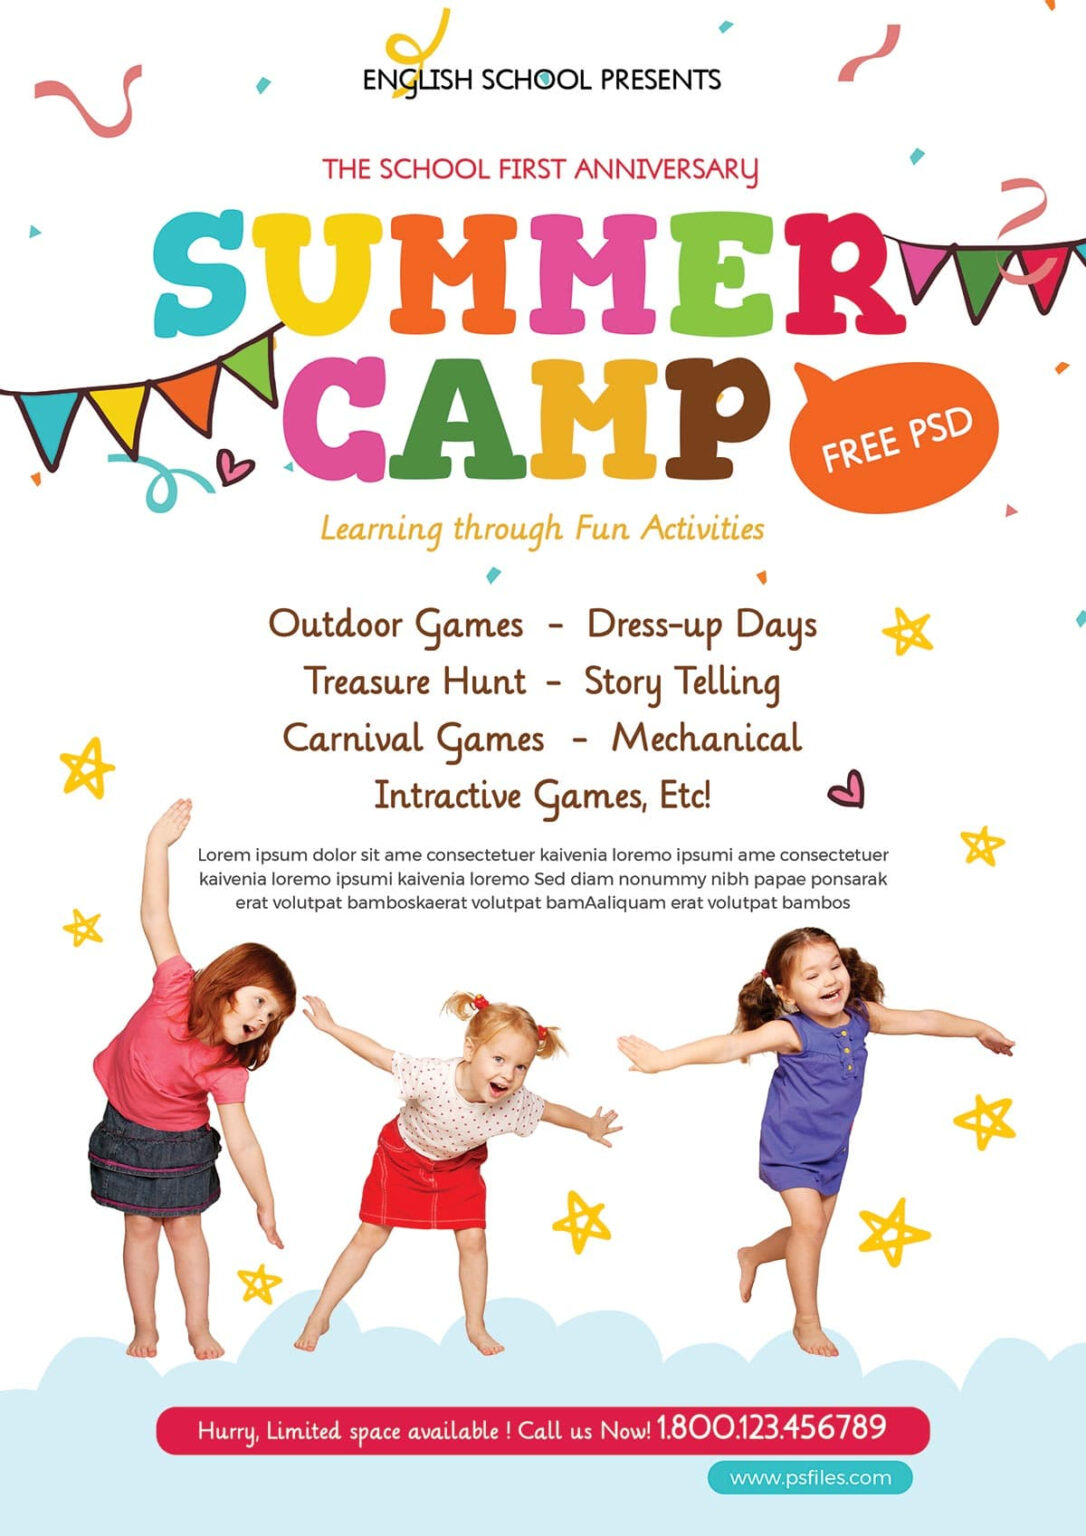 Kids Summer Camp Party Free Psd Flyer Template Stockpsd Within Summer